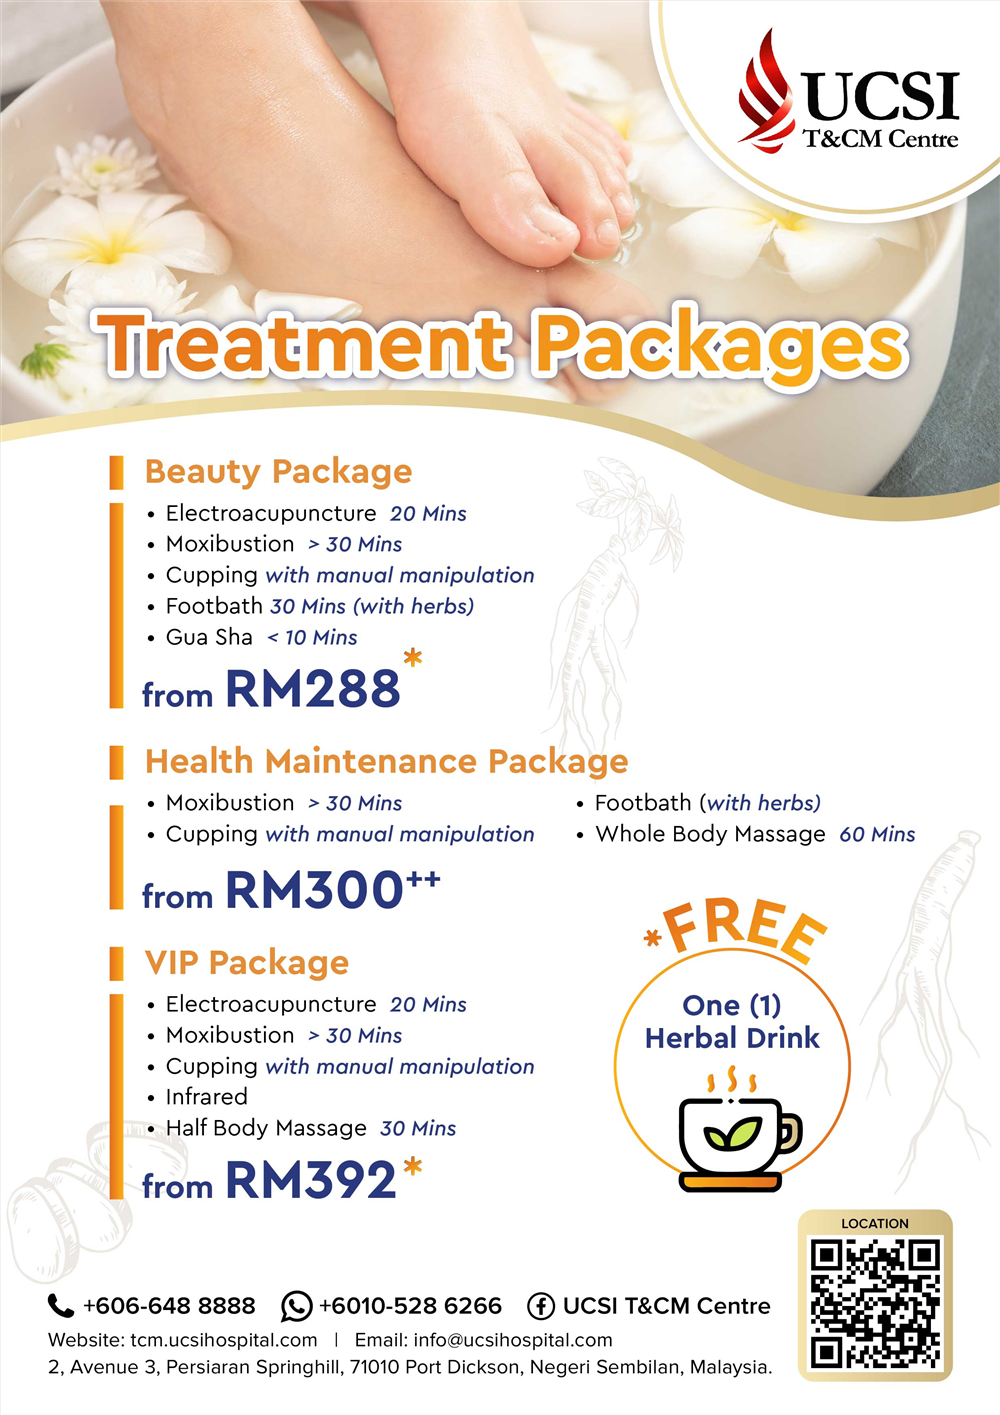 Treatment Packages (Beauty, Health & VIP)